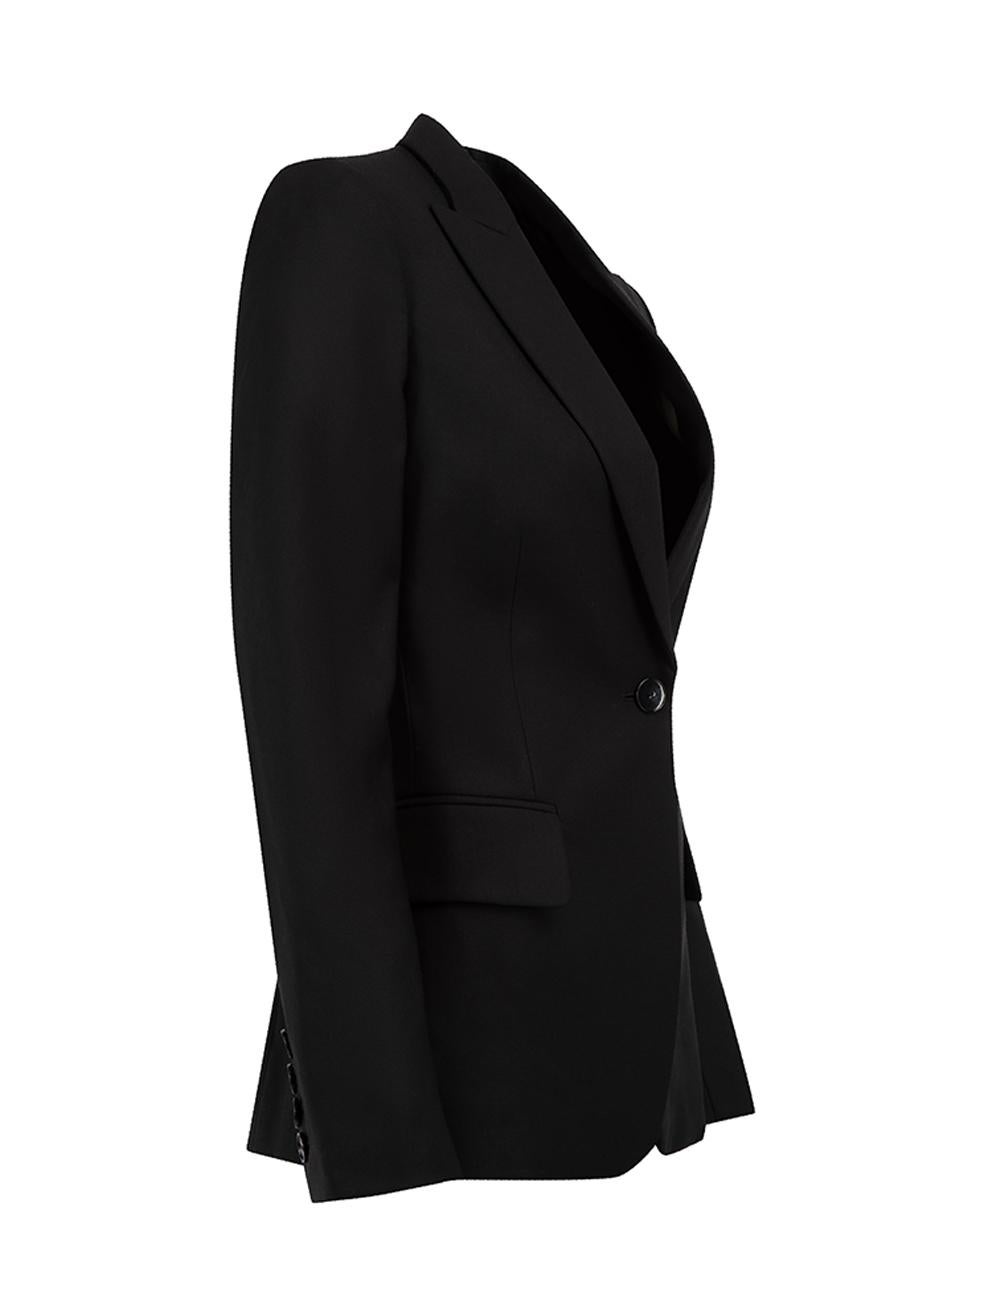 CONDITION is Very good. Hardly any visible wear to blazer is evident on this used Stella McCartney designer resale item. Details Black Wool Fitted Round collar Long sleeves Buttoned cuffs Single button front closure 2x Front pockets, still sewn shut